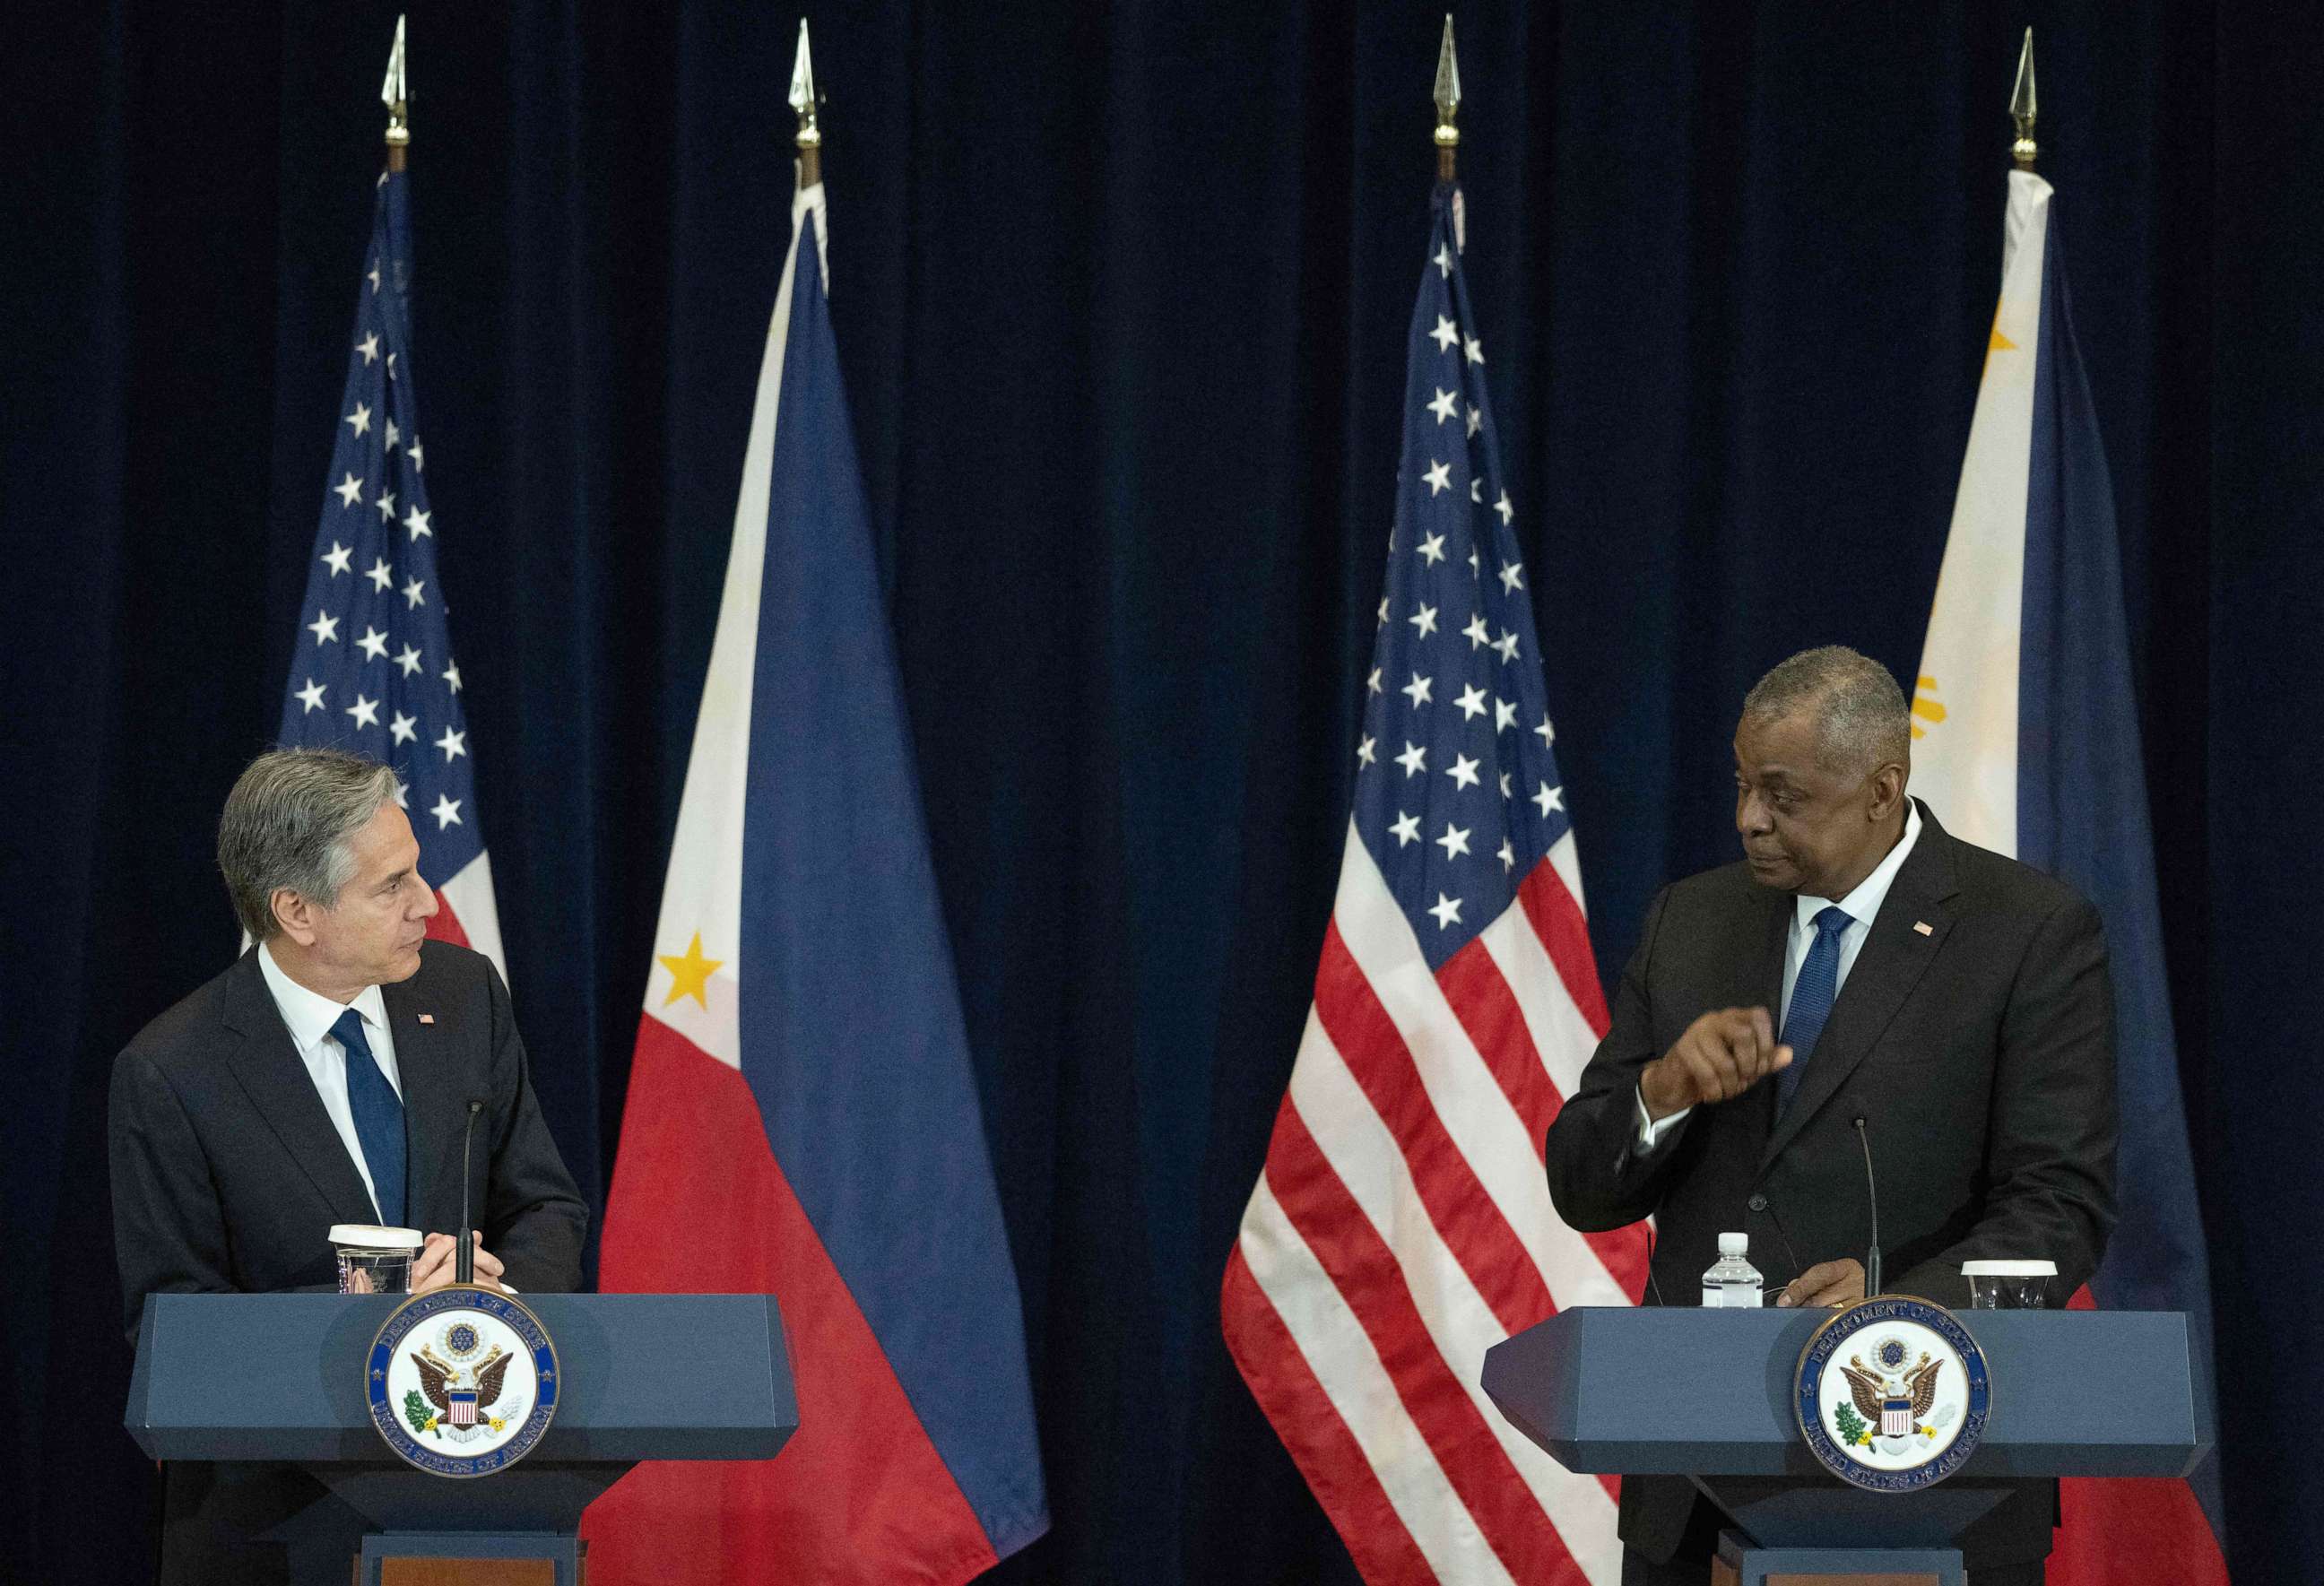 PHOTO: Secretary of State Antony Blinken and Defense Secretary Lloyd Austin participate in the US-Philippines 2+2 Ministerial Dialogue Plenary Session on Promoting Regional Security at the State Department in Washington, DC, on April 11, 2023.